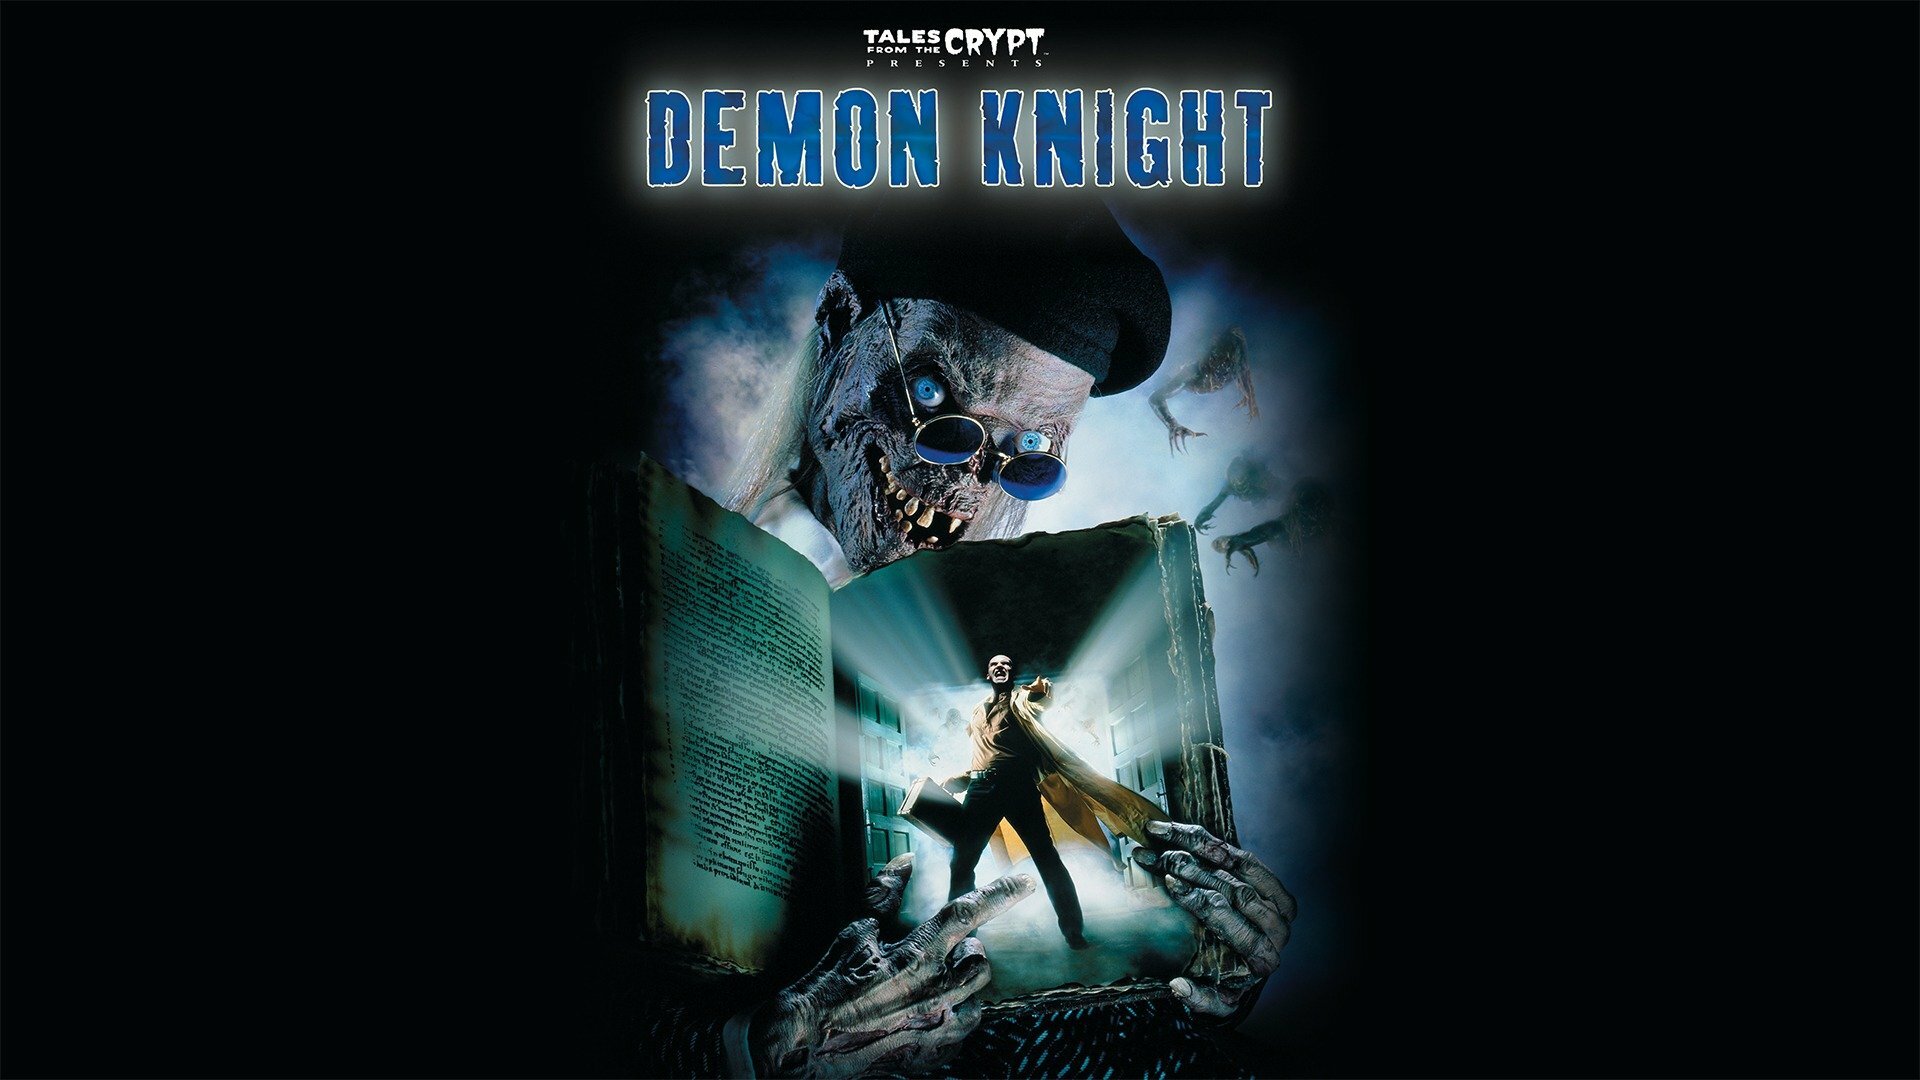 Tales From the Crypt: Demon Knight